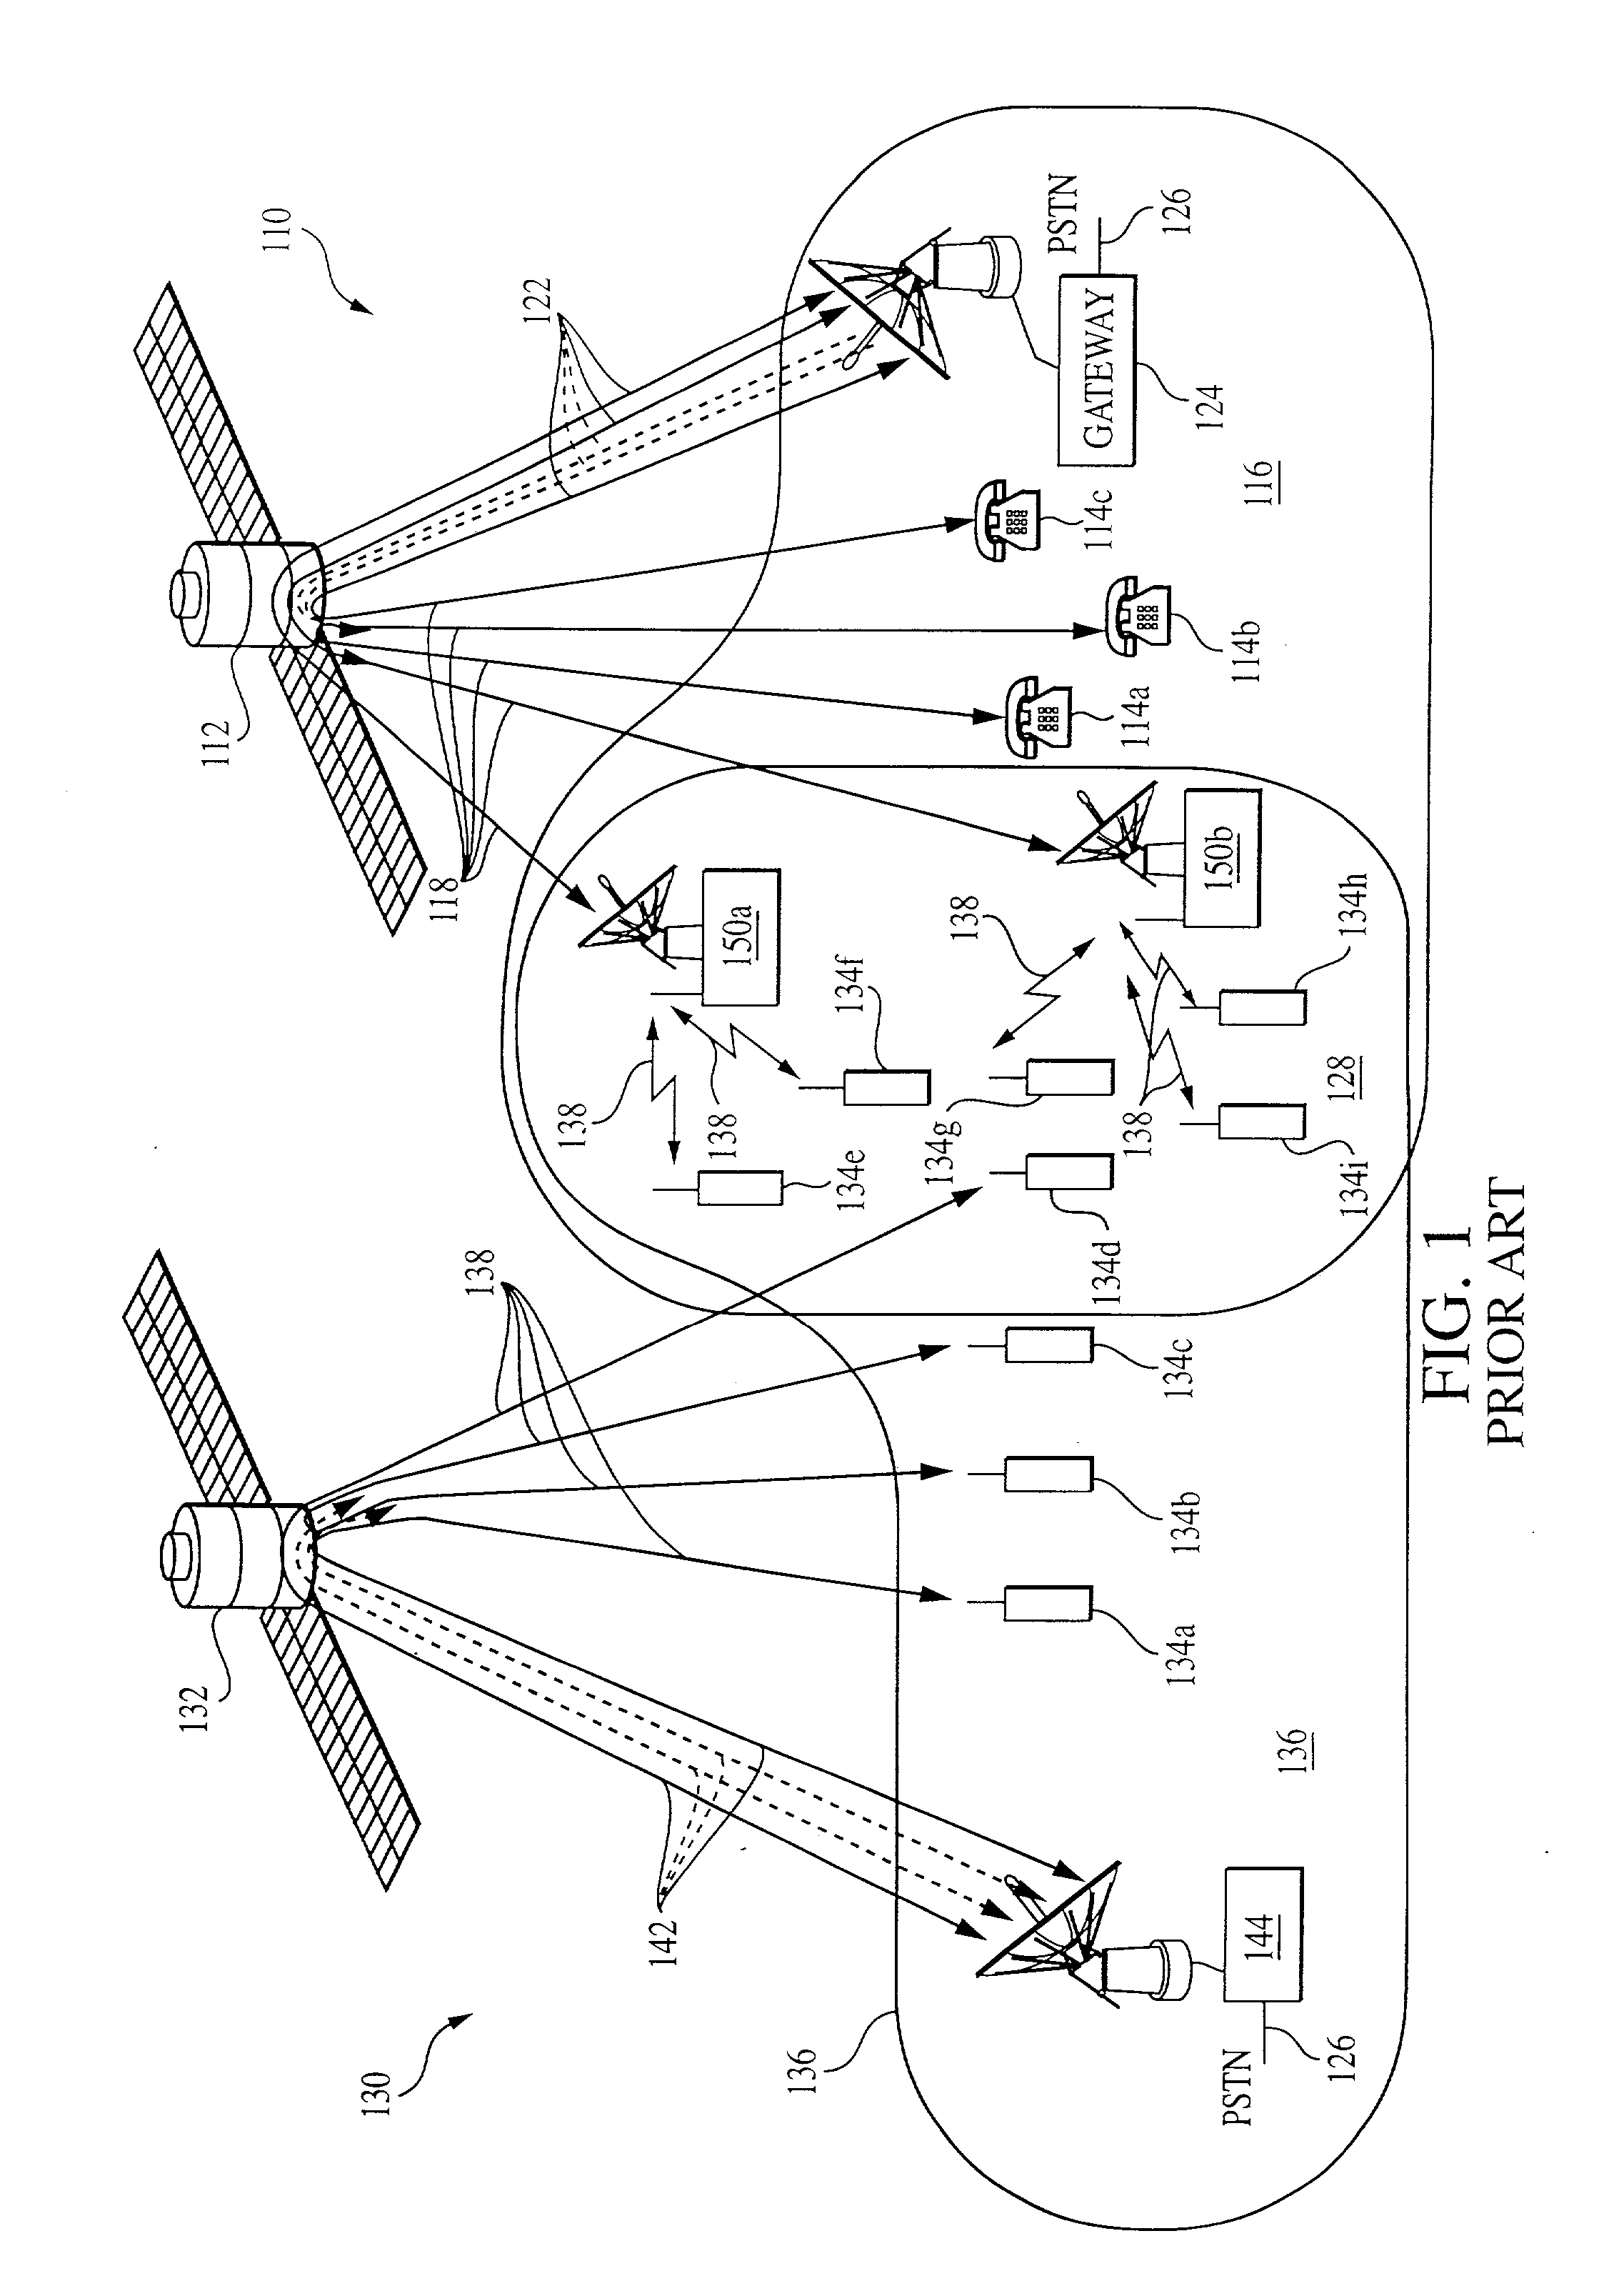 Integrated or autonomous system and method of satellite-terrestrial frequency reuse using signal attenuation and/or blockage, dynamic assignment of frequencies and/or hysteresis